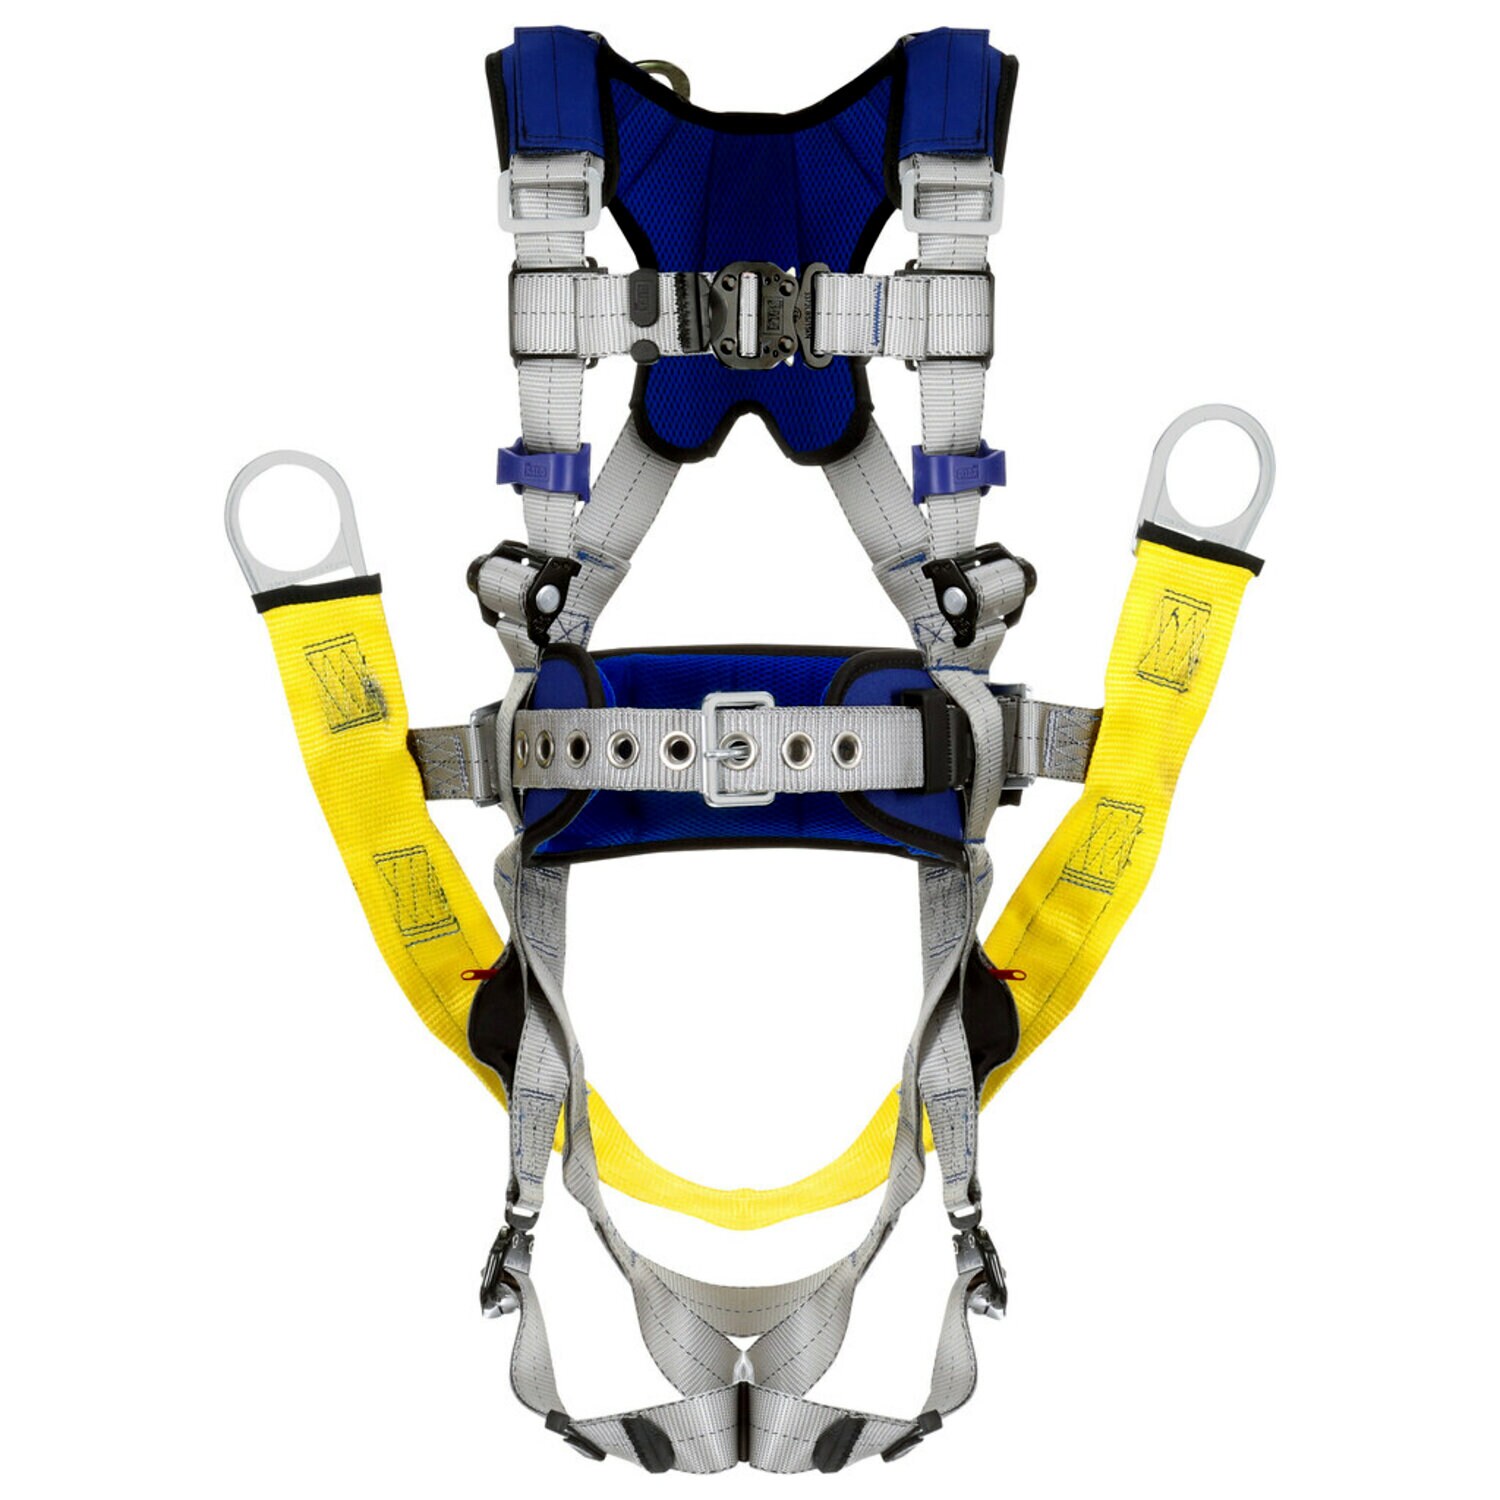 7012817689 - 3M DBI-SALA ExoFit X100 Comfort Oil & Gas Climbing/Suspension Safety Harness 1401205, Small, Energy Absorber Extension